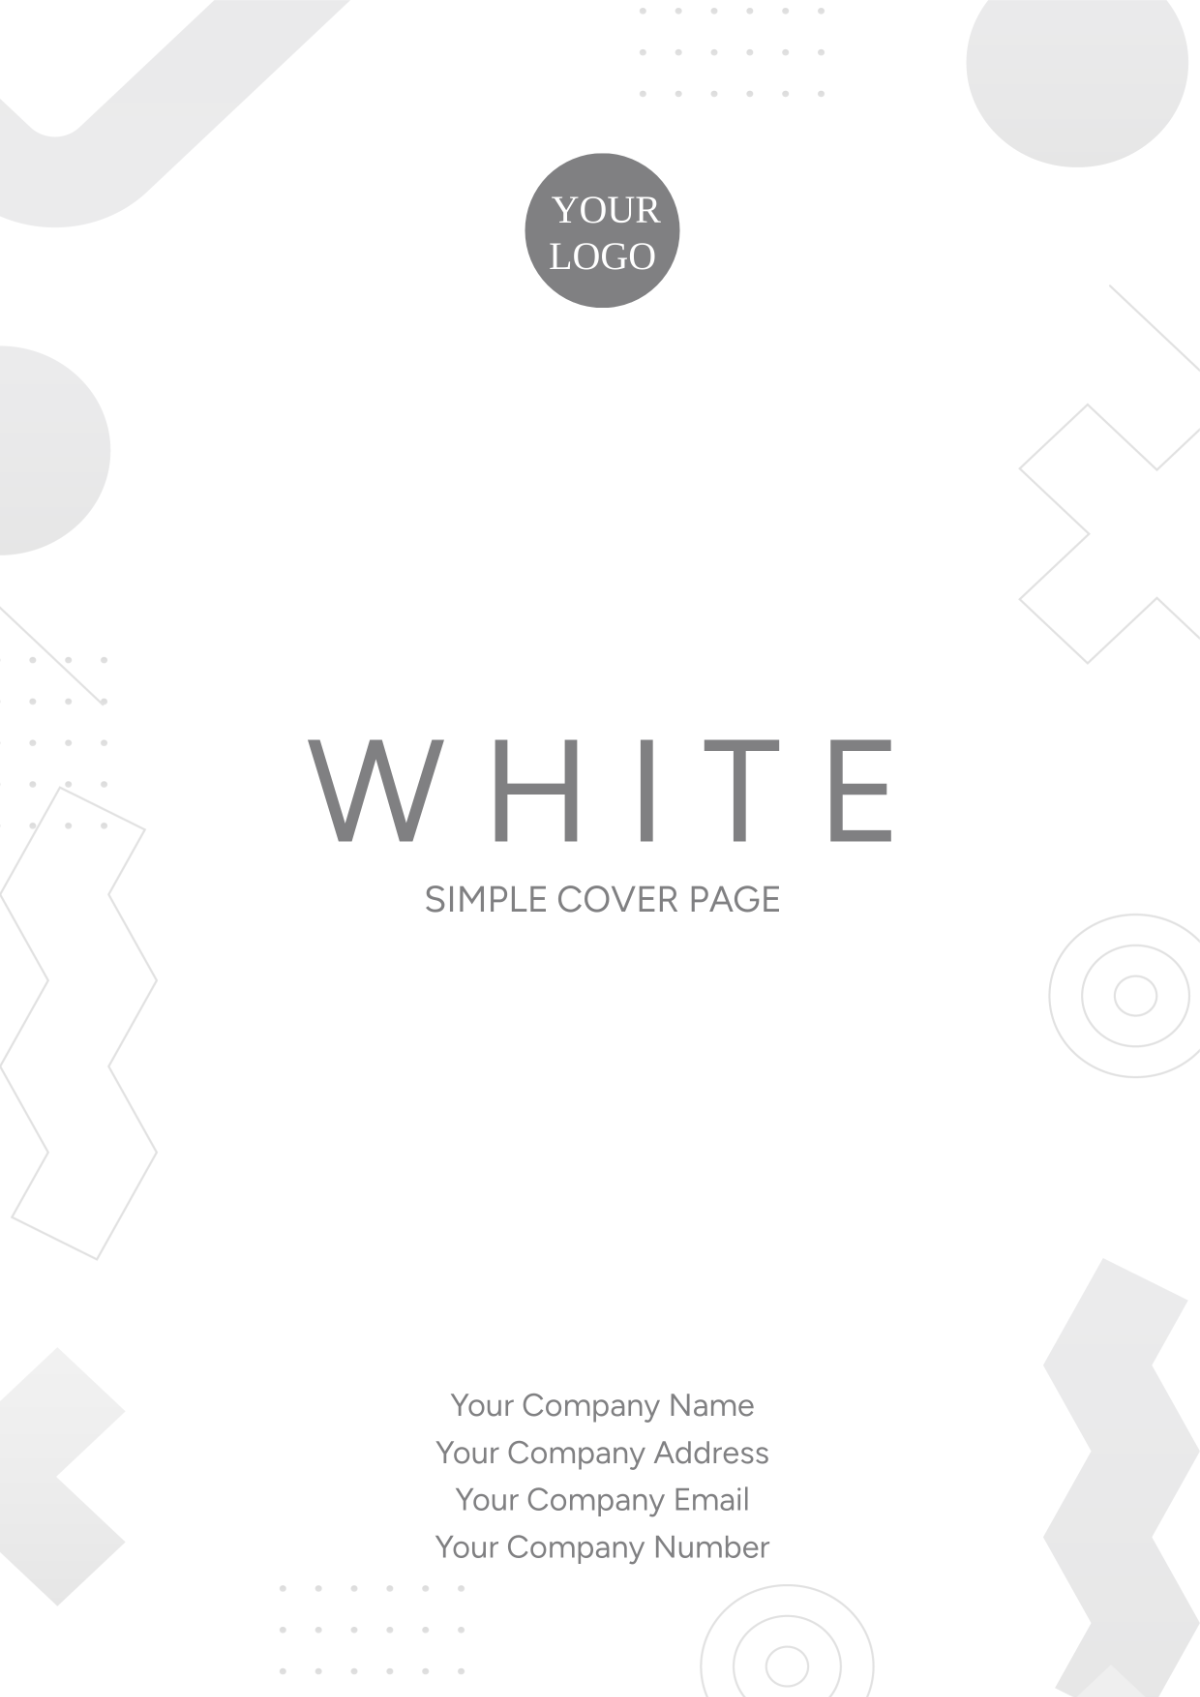 White Simple Cover Page